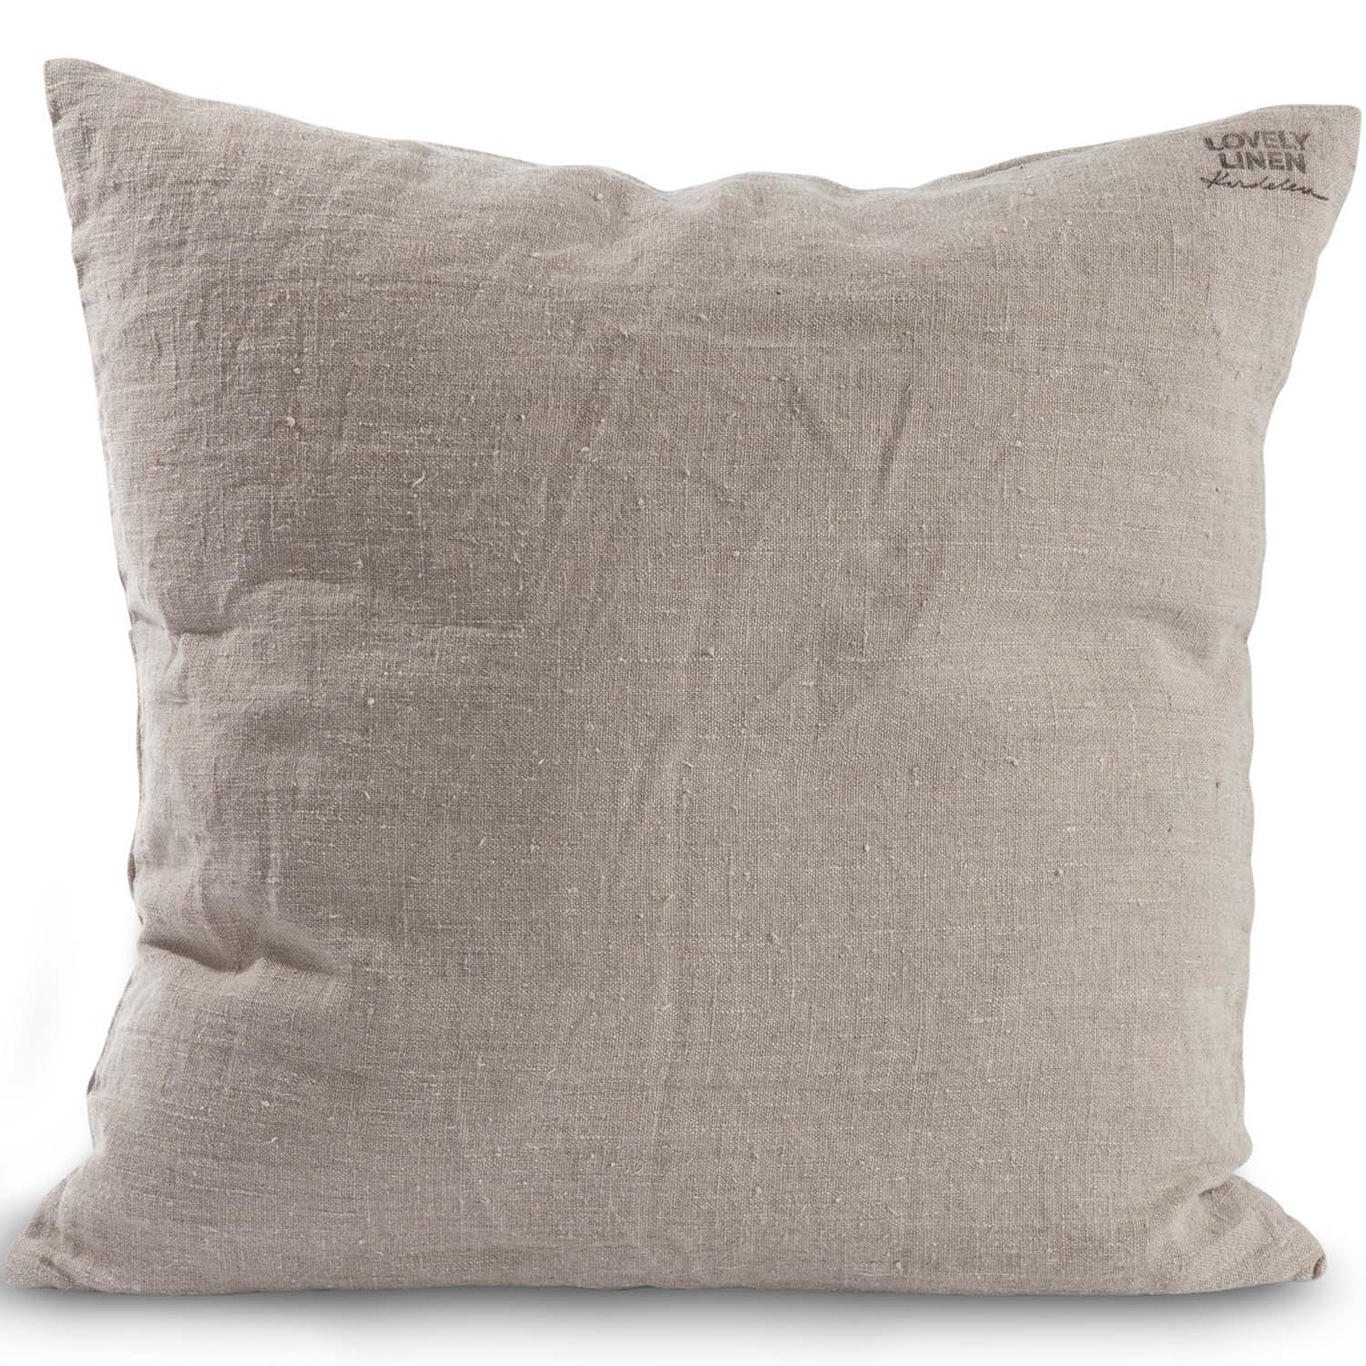 Lovely Cushion Cover 50x50 cm, Natural Beige